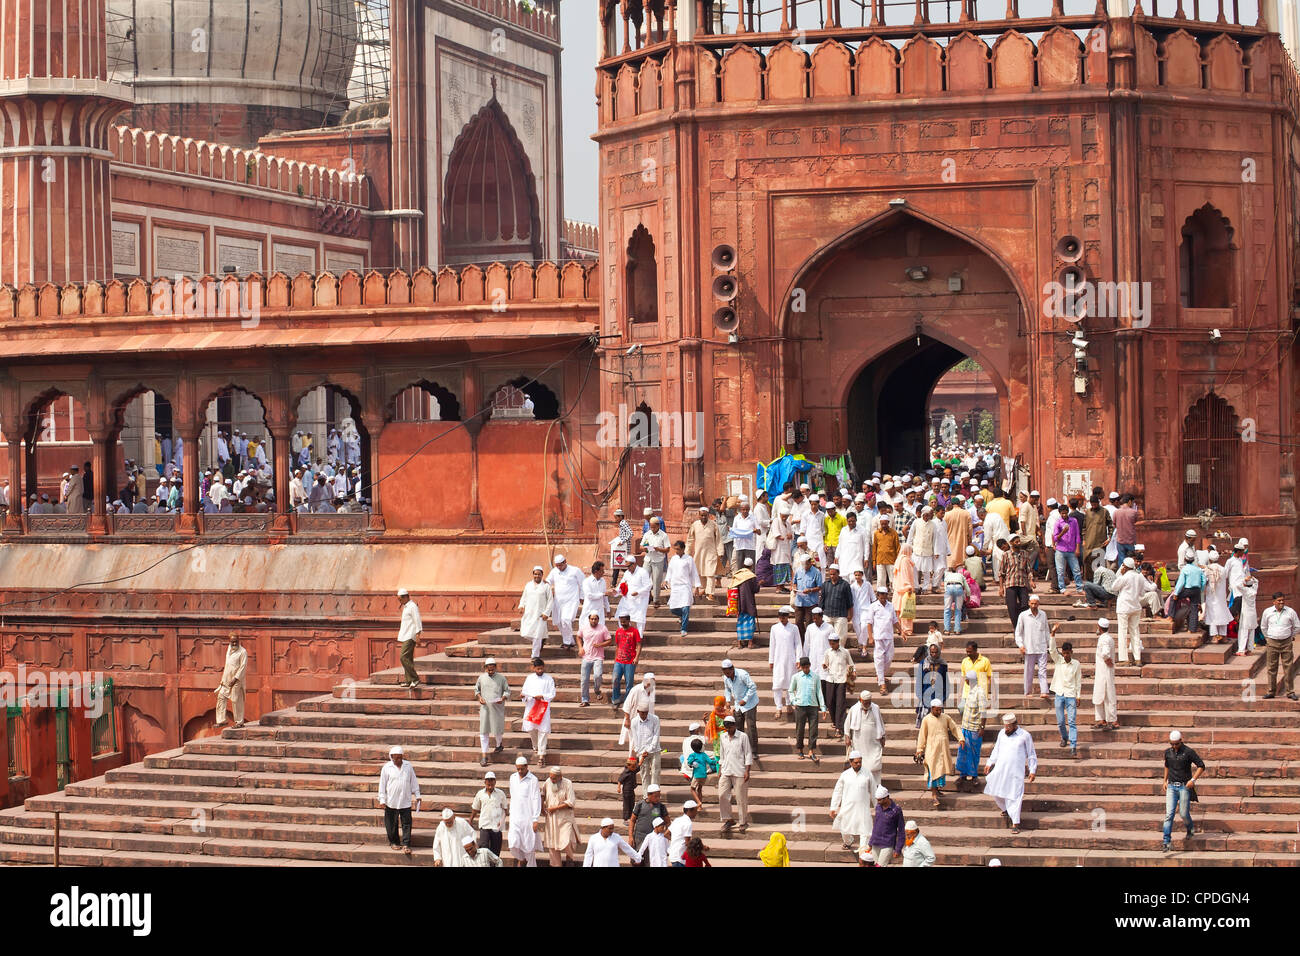 People leaving the Jama Masjid (Friday Mosque) after the Friday Prayers, Old Delhi, Delhi, India, Asia Stock Photo